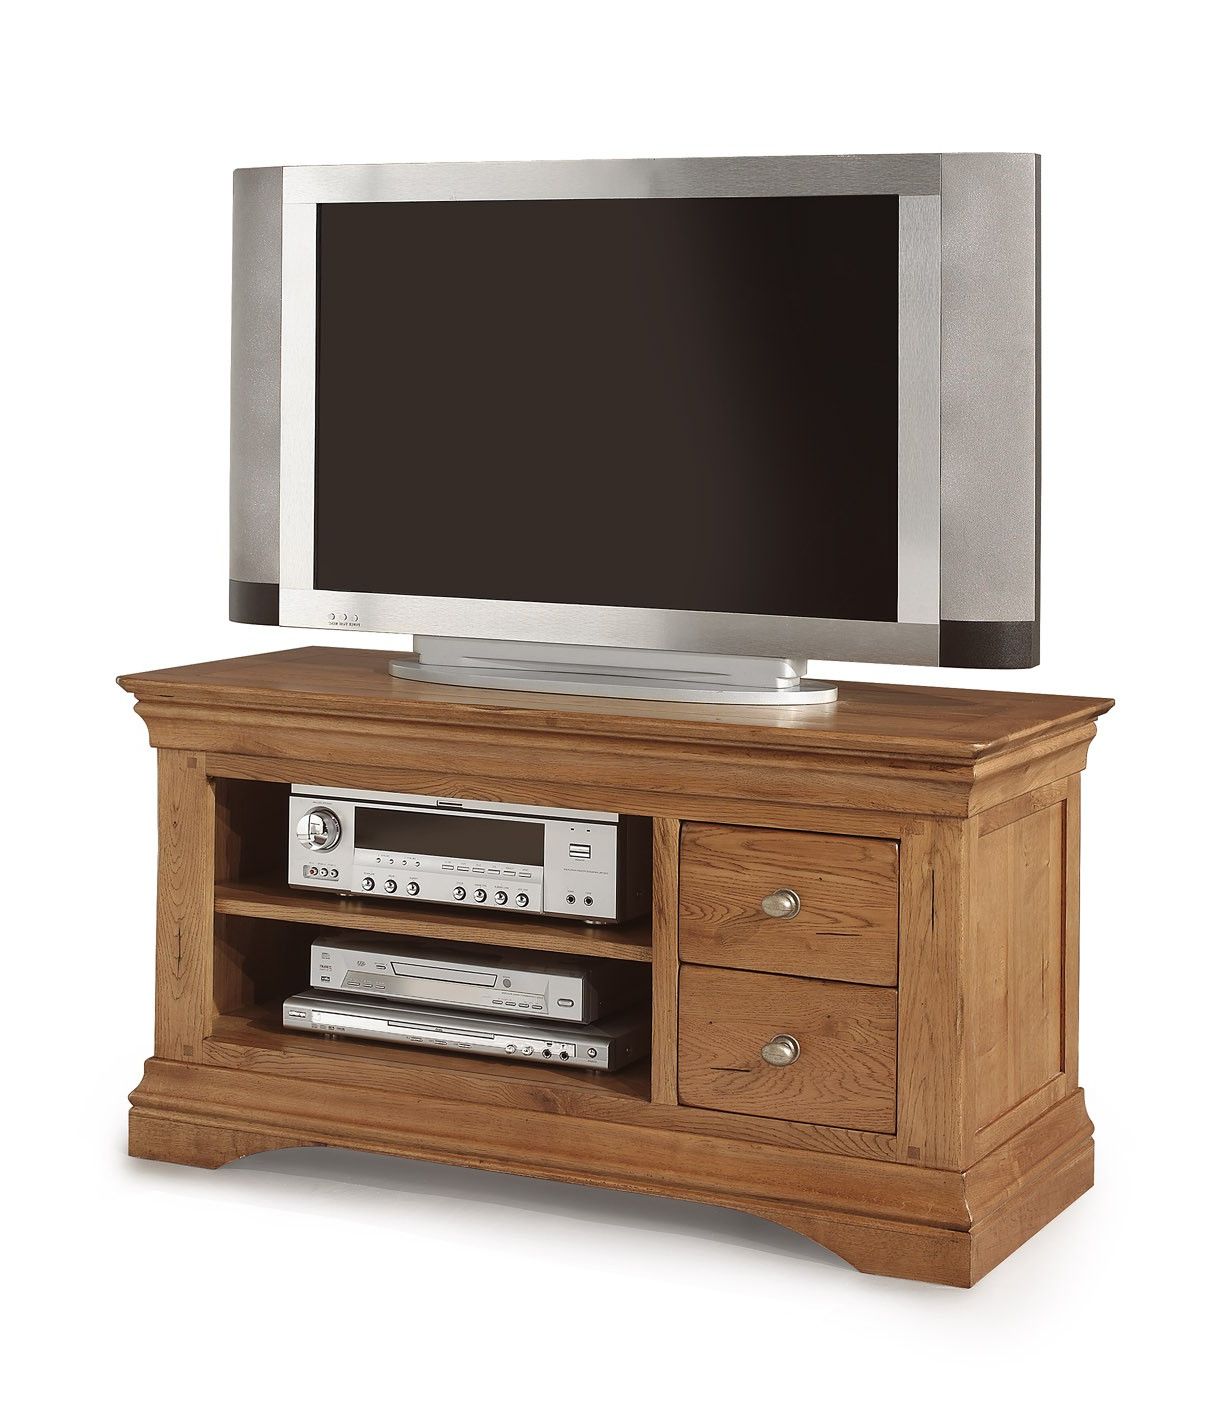 Contemporary Oak Tv Cabinets Inside Popular Solid Oak Tv Stands (View 16 of 20)